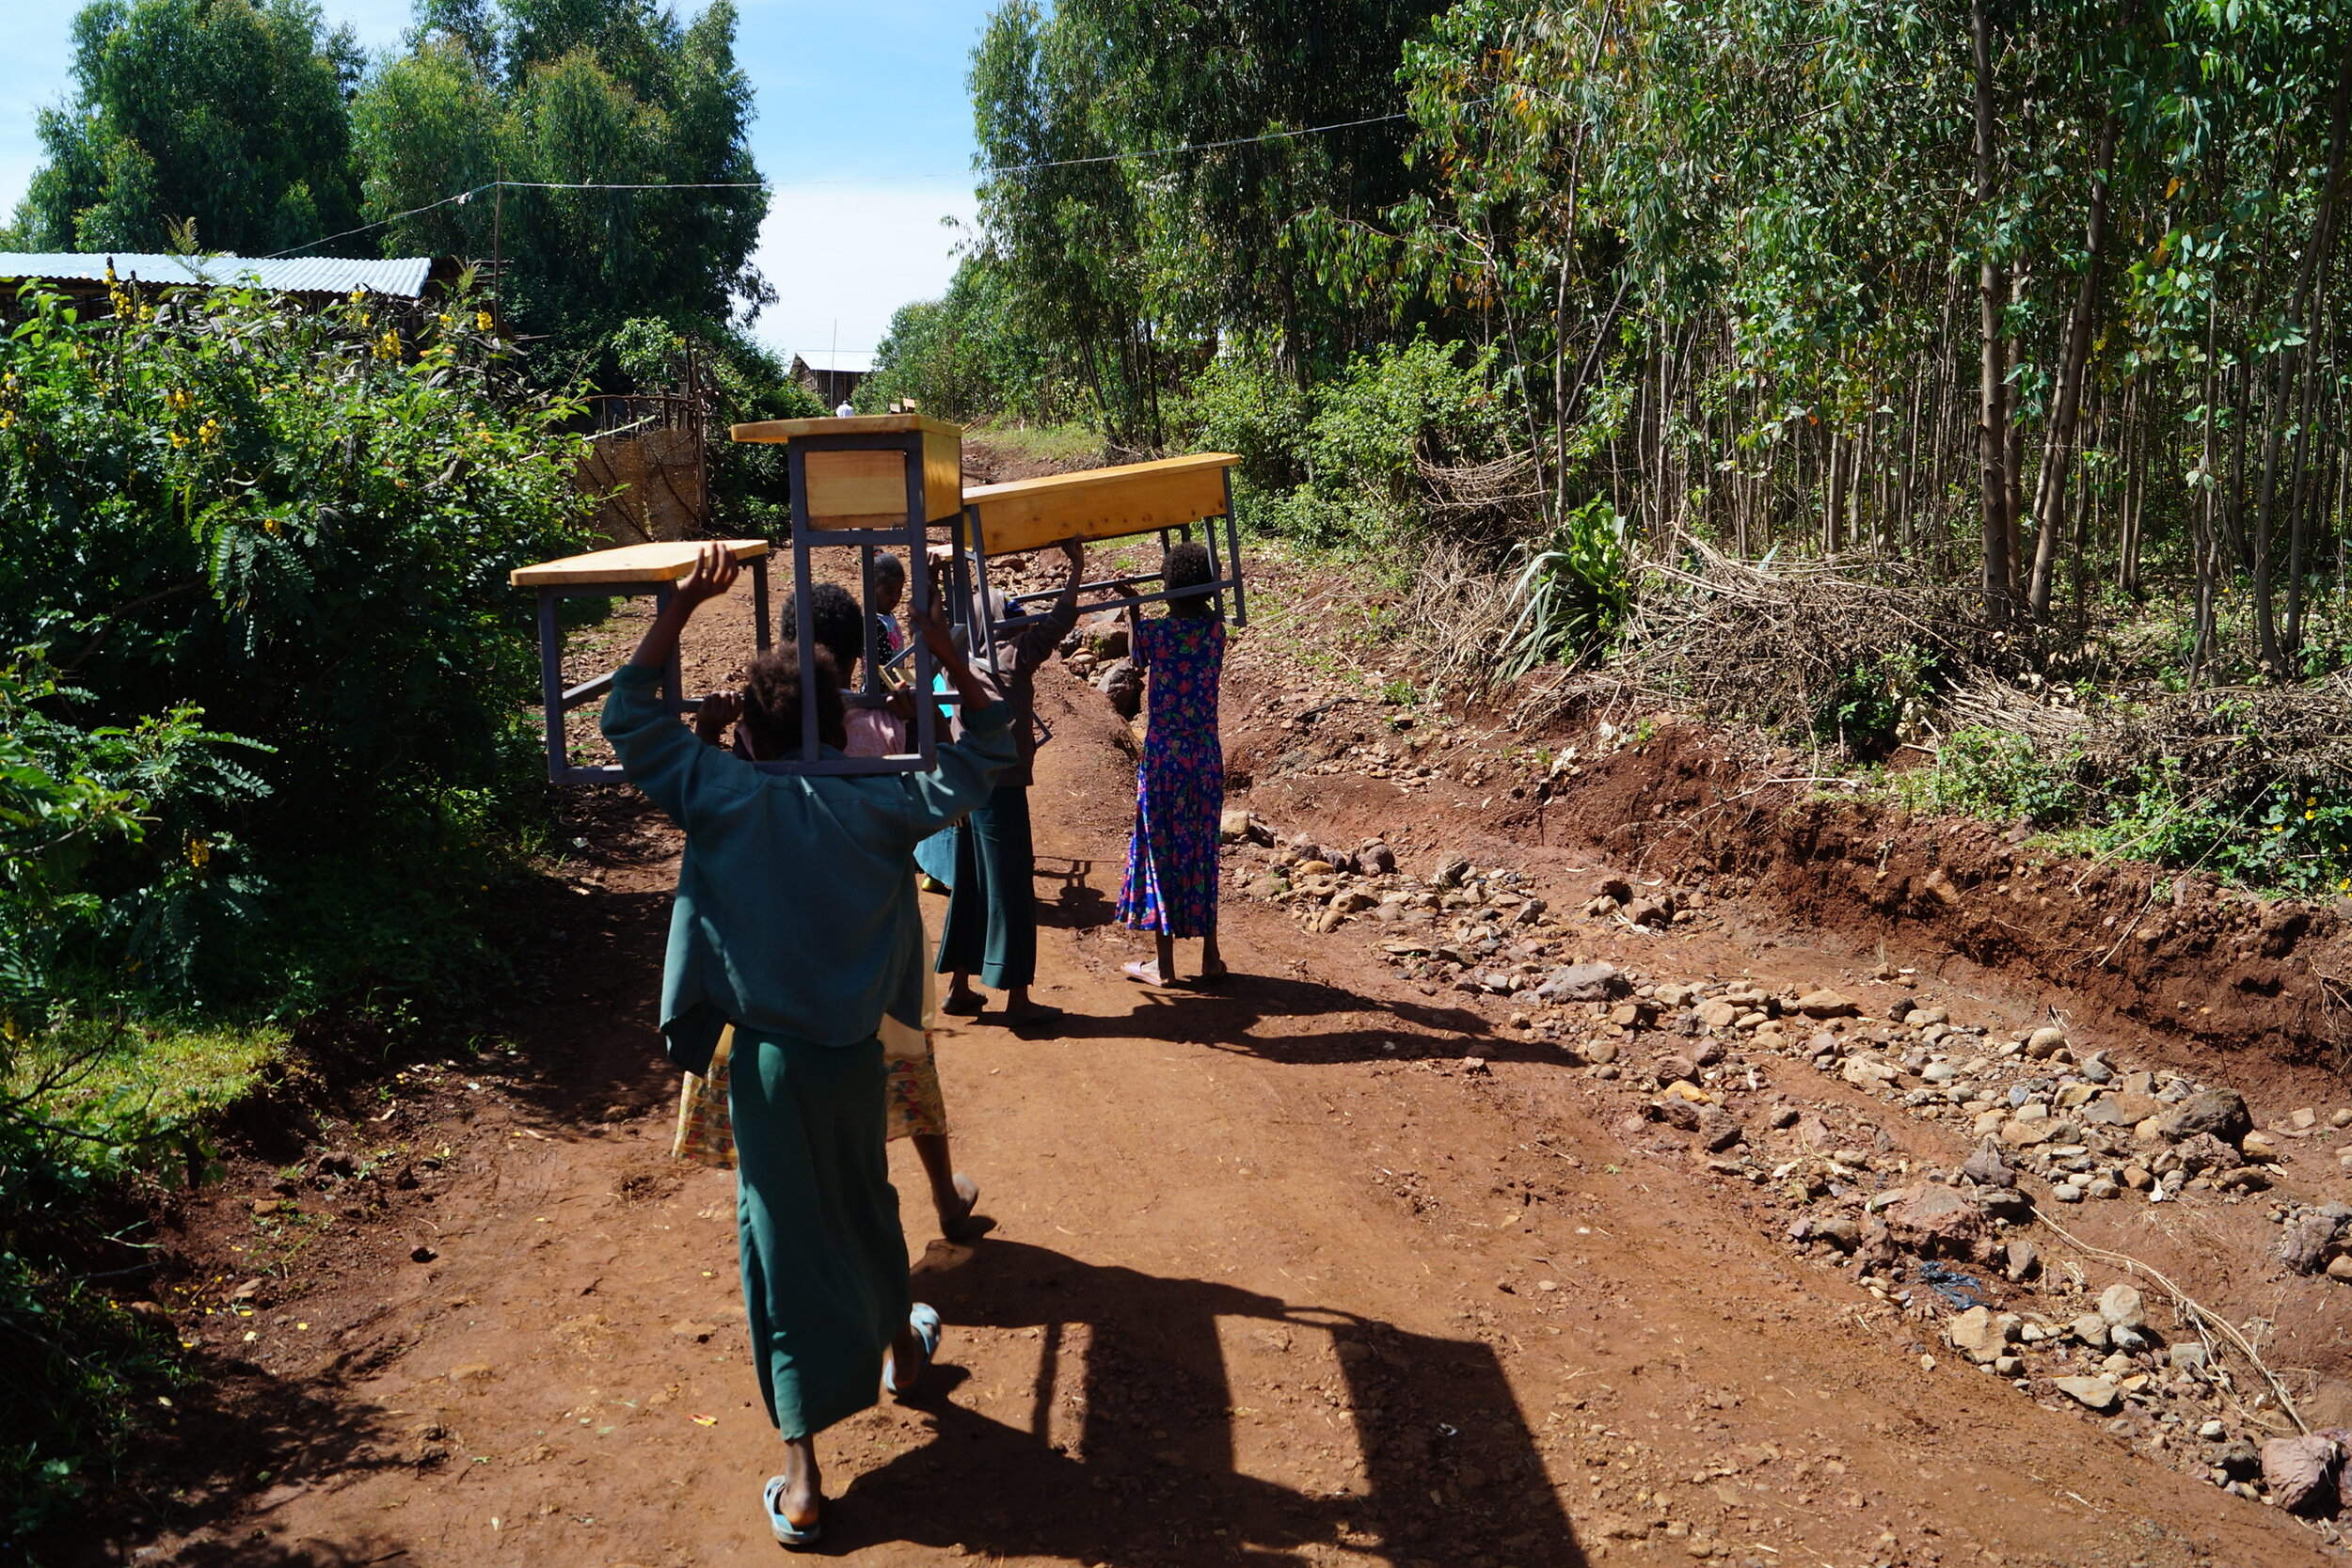 Students Carrying Desks to the New School